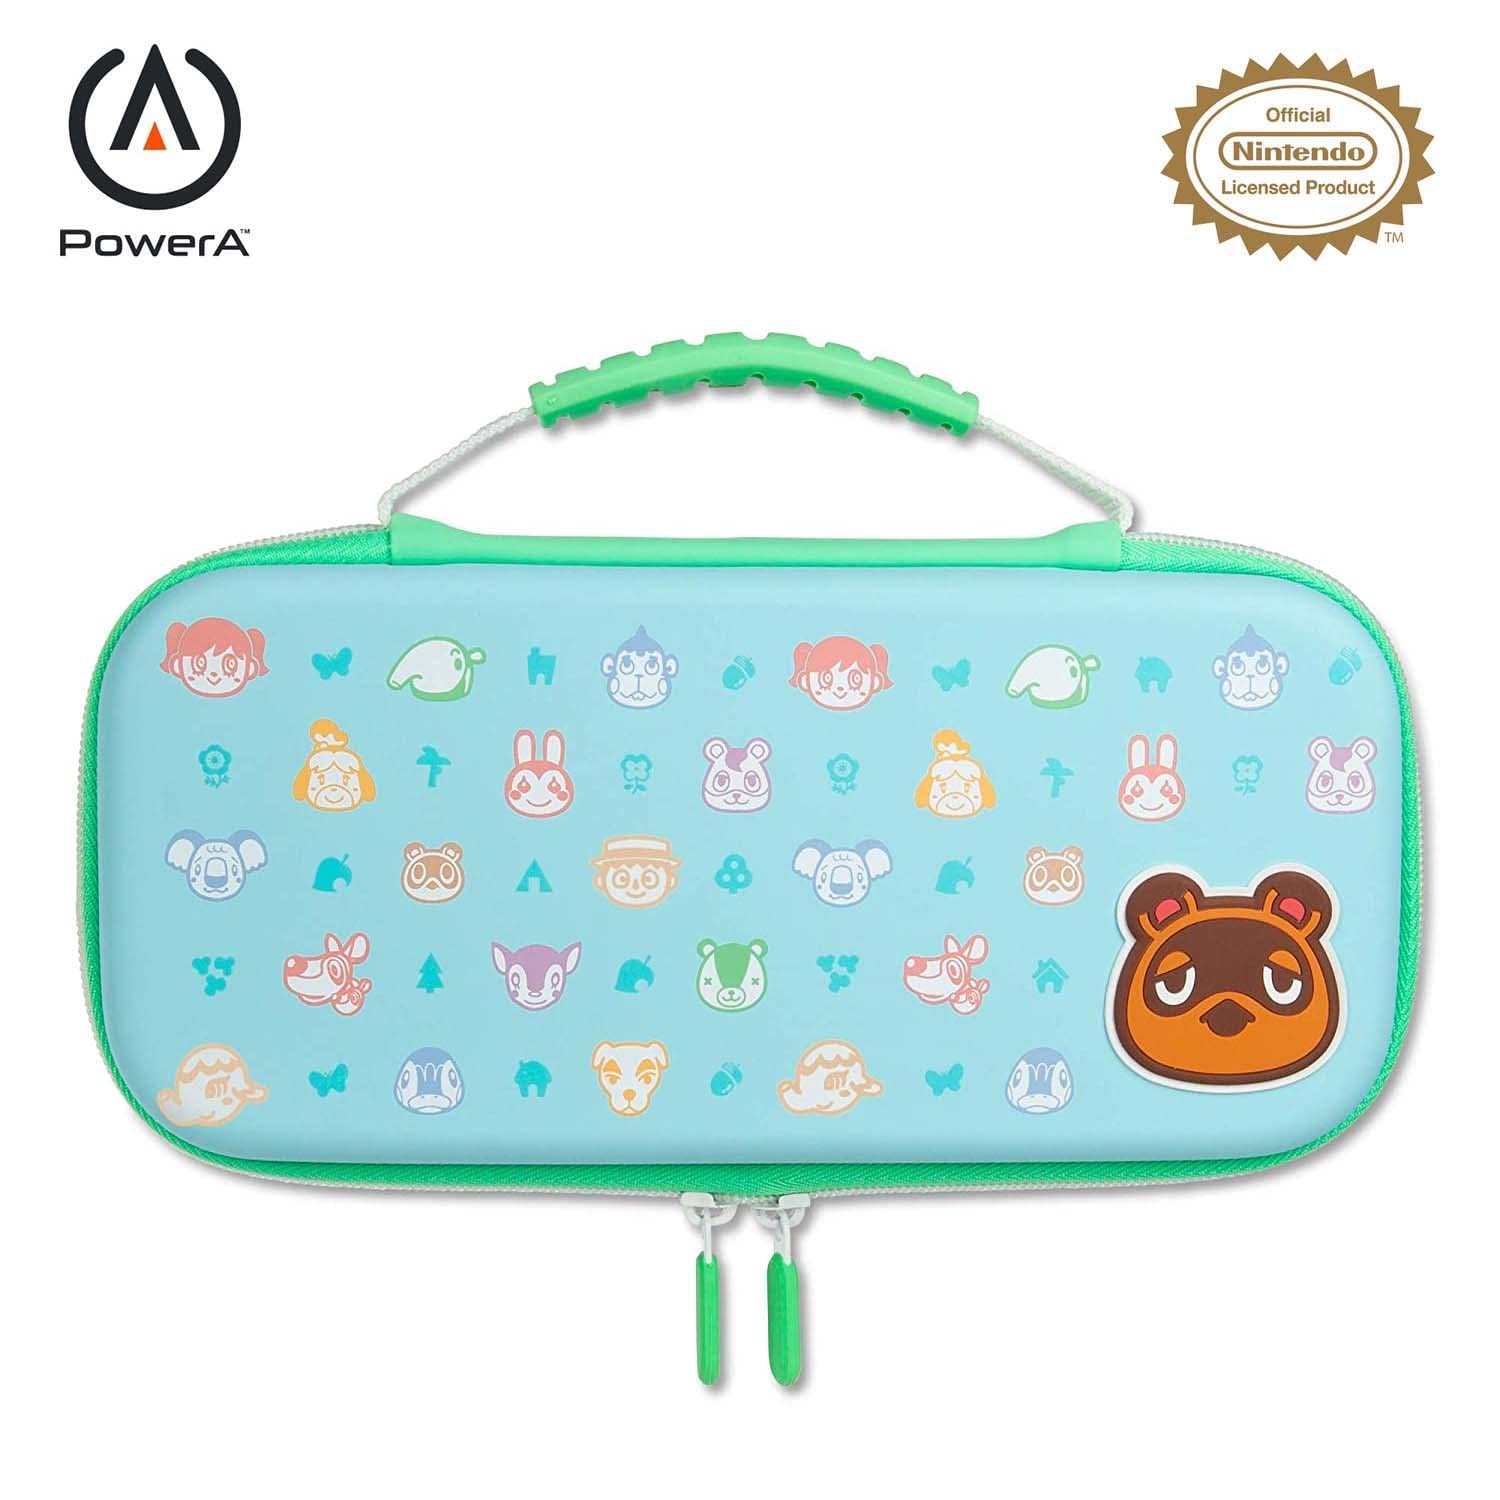 PowerA Protection Case for Nintendo Switch or Nintendo Switch Lite - Animal Crossing